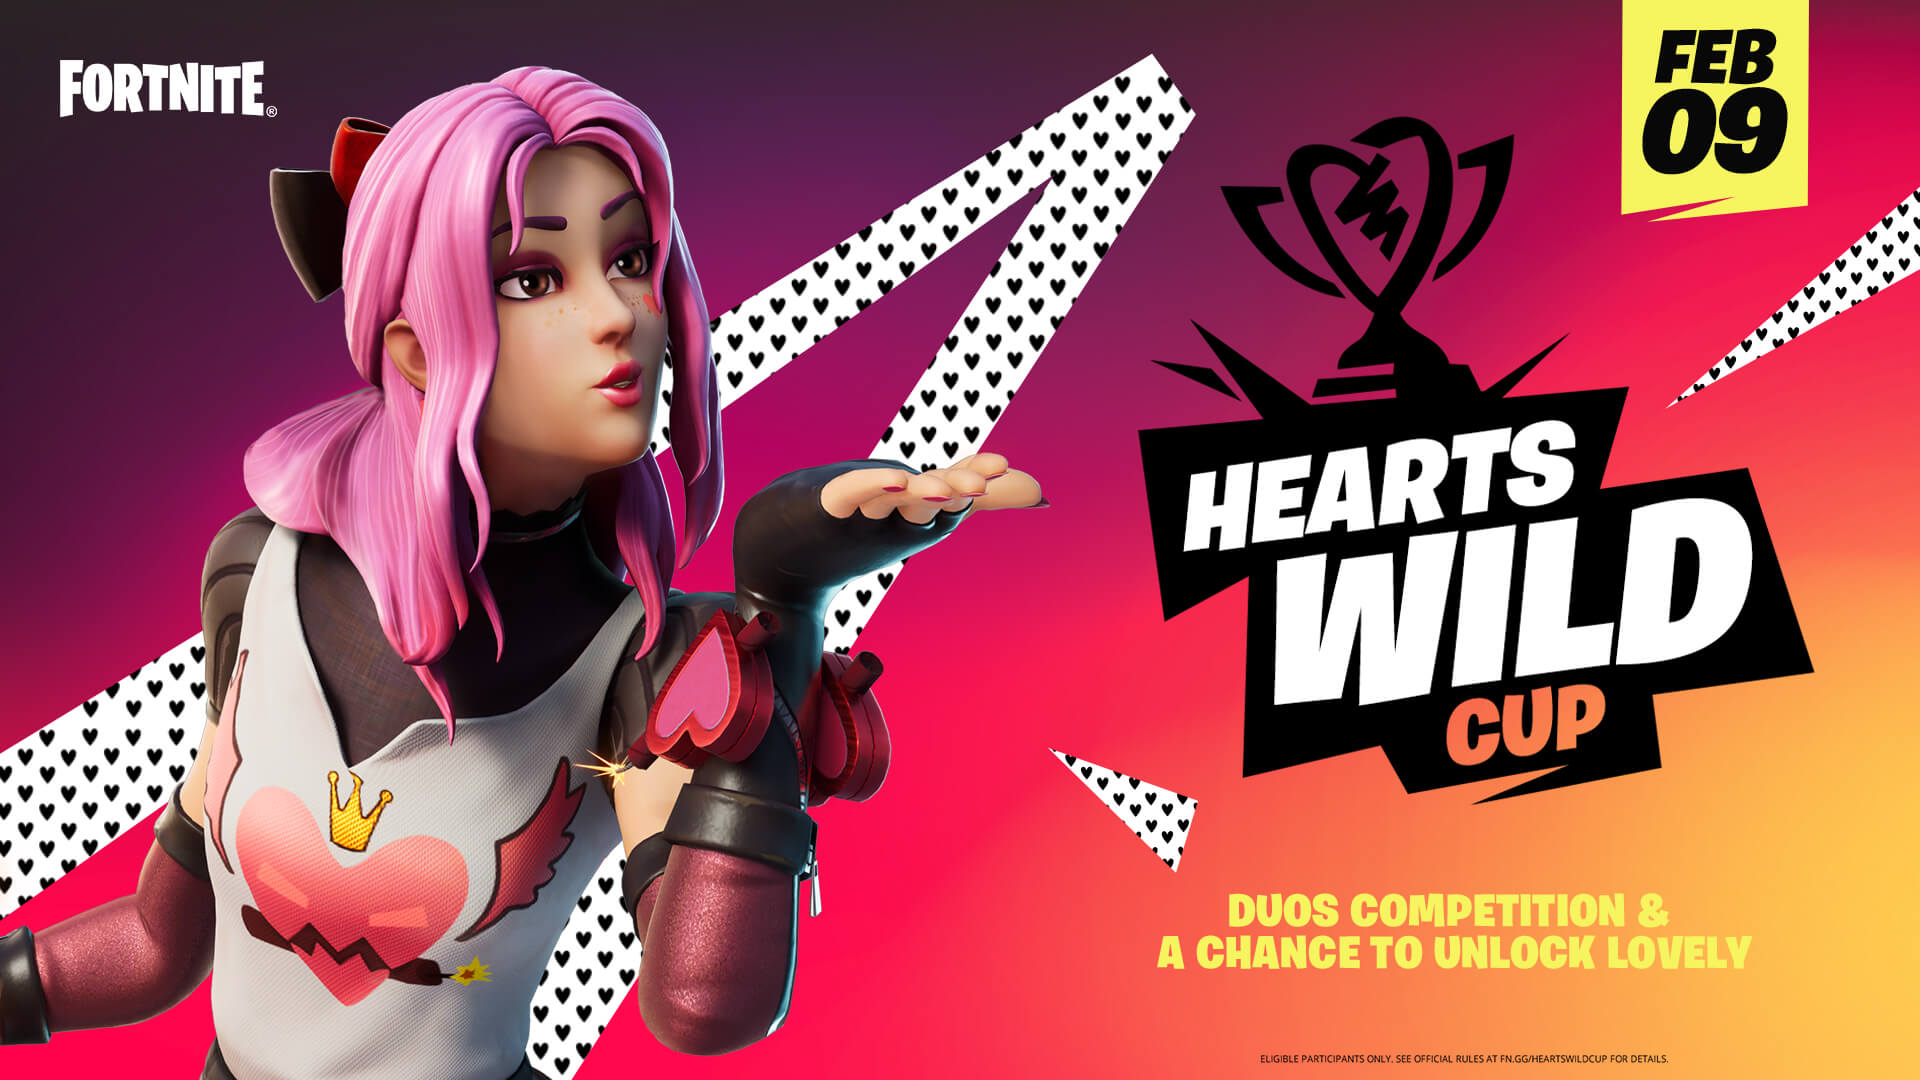 "Fortnite" is hosting a Hearts Wild Cup in honor of Valen...